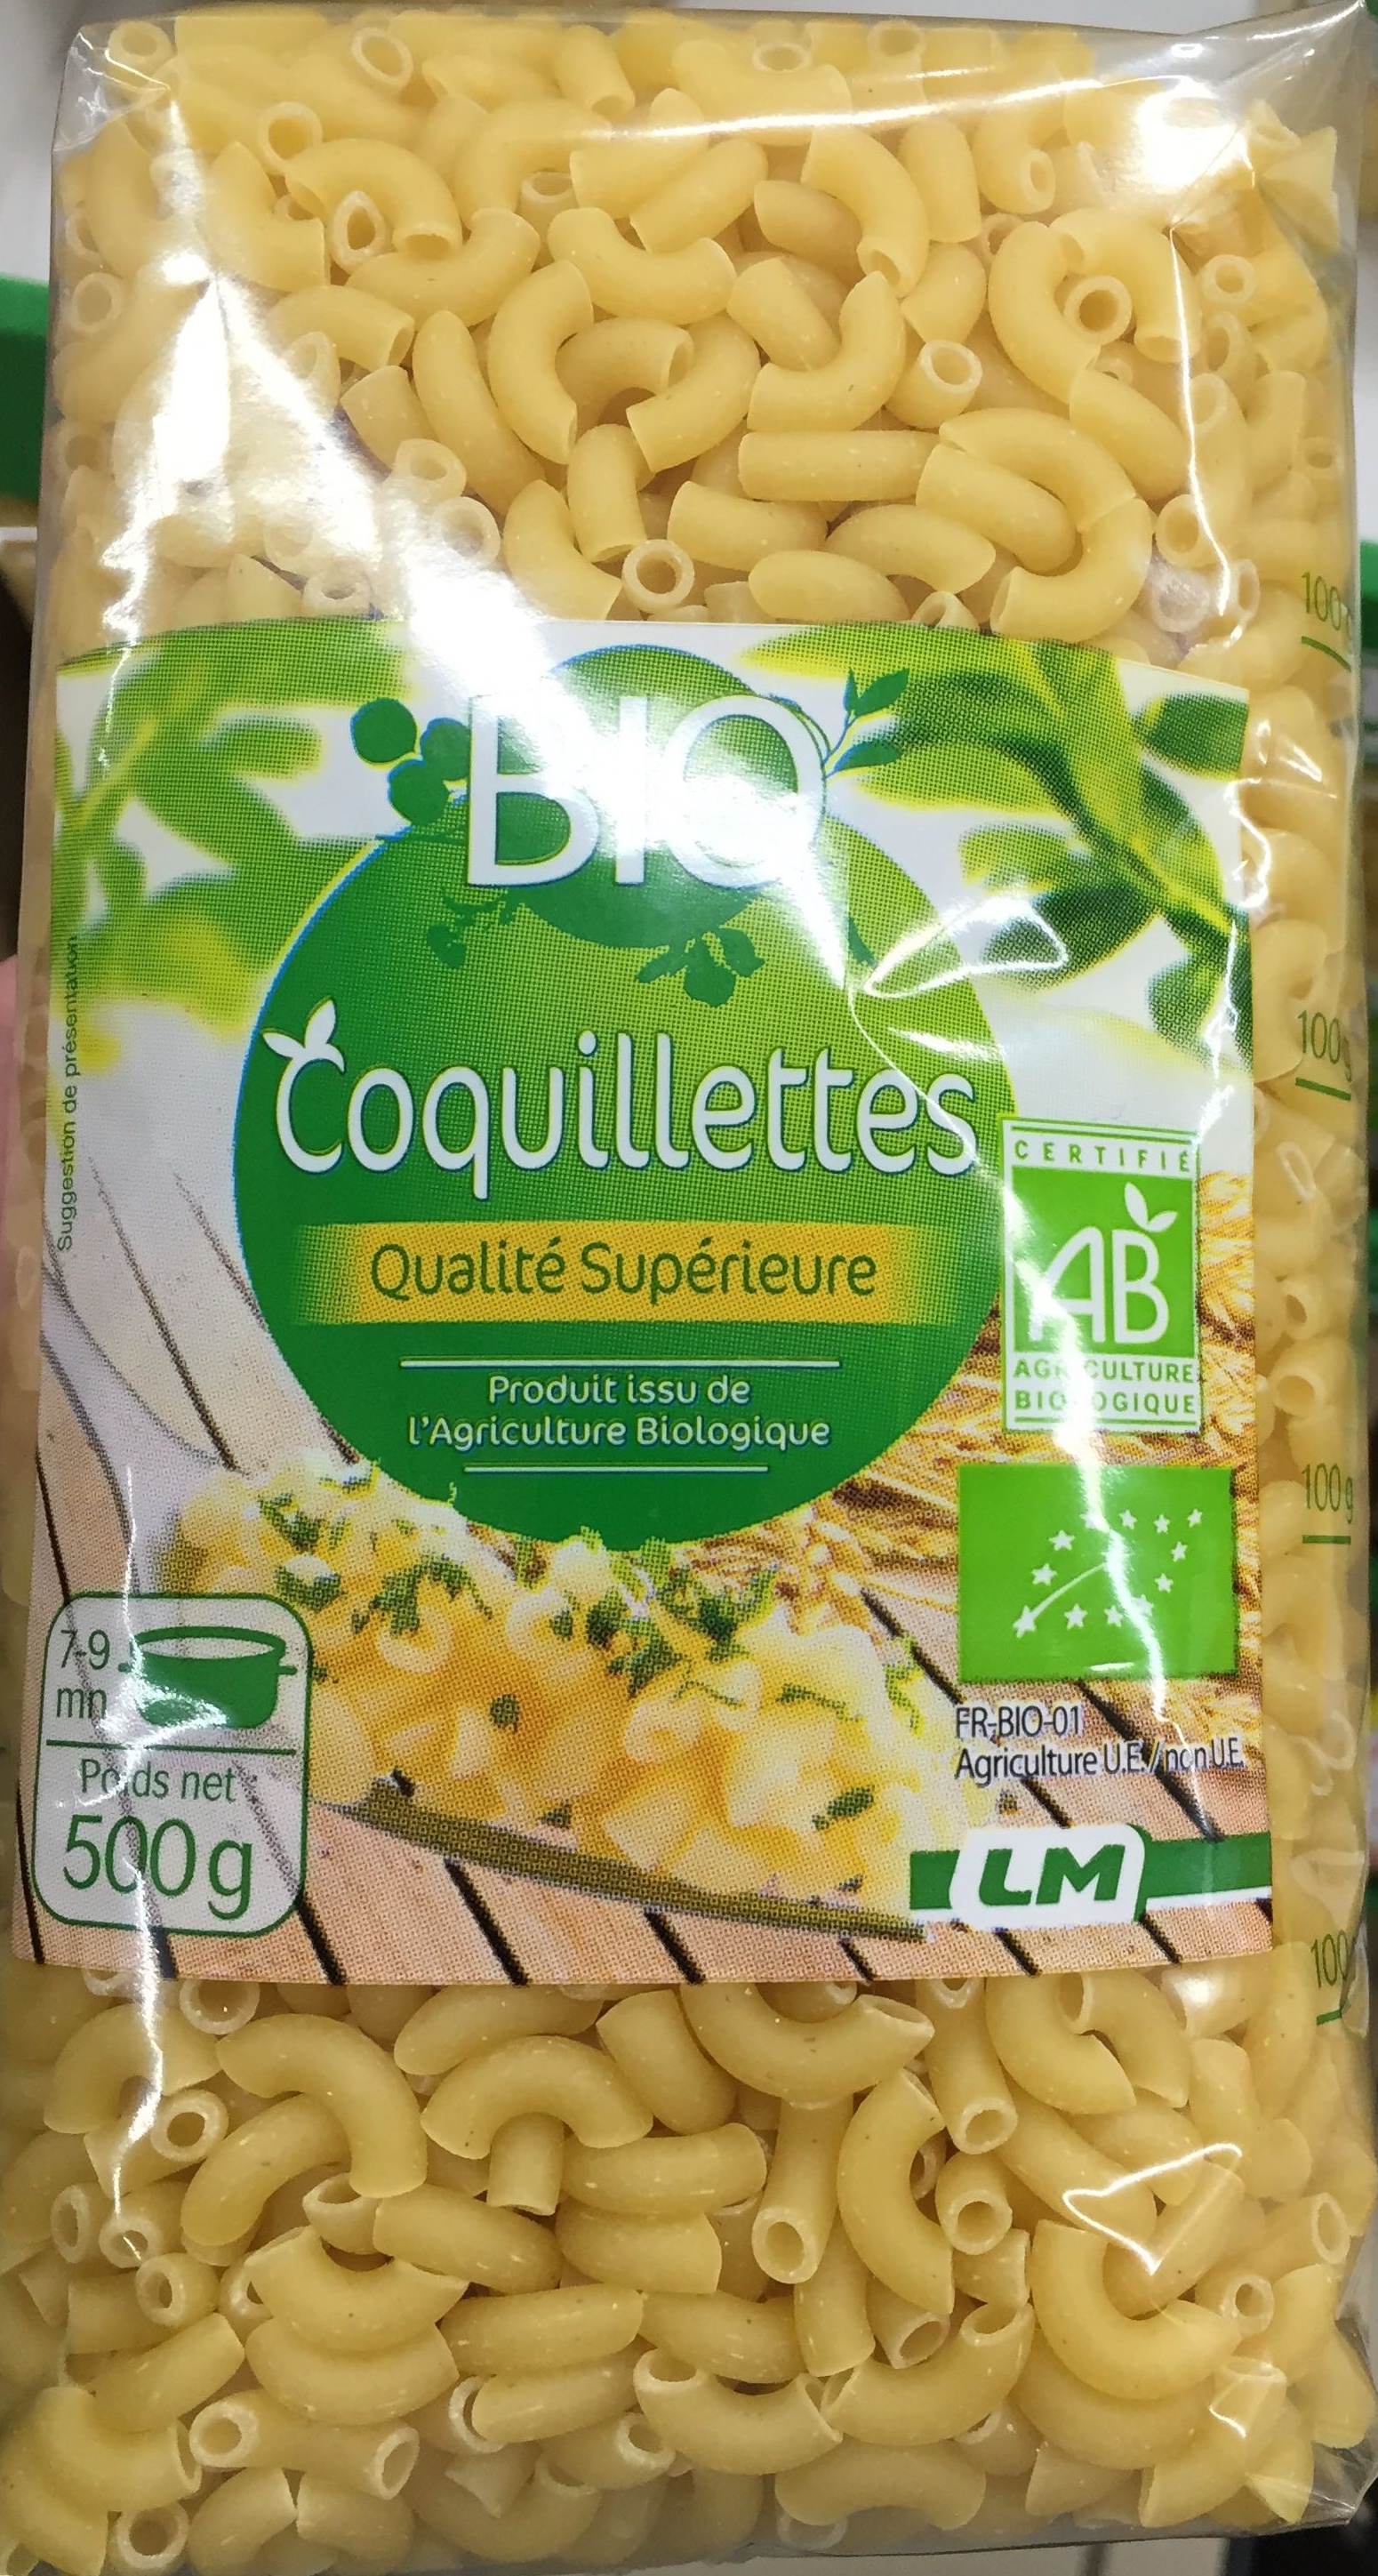 Coquillettes - Product - fr